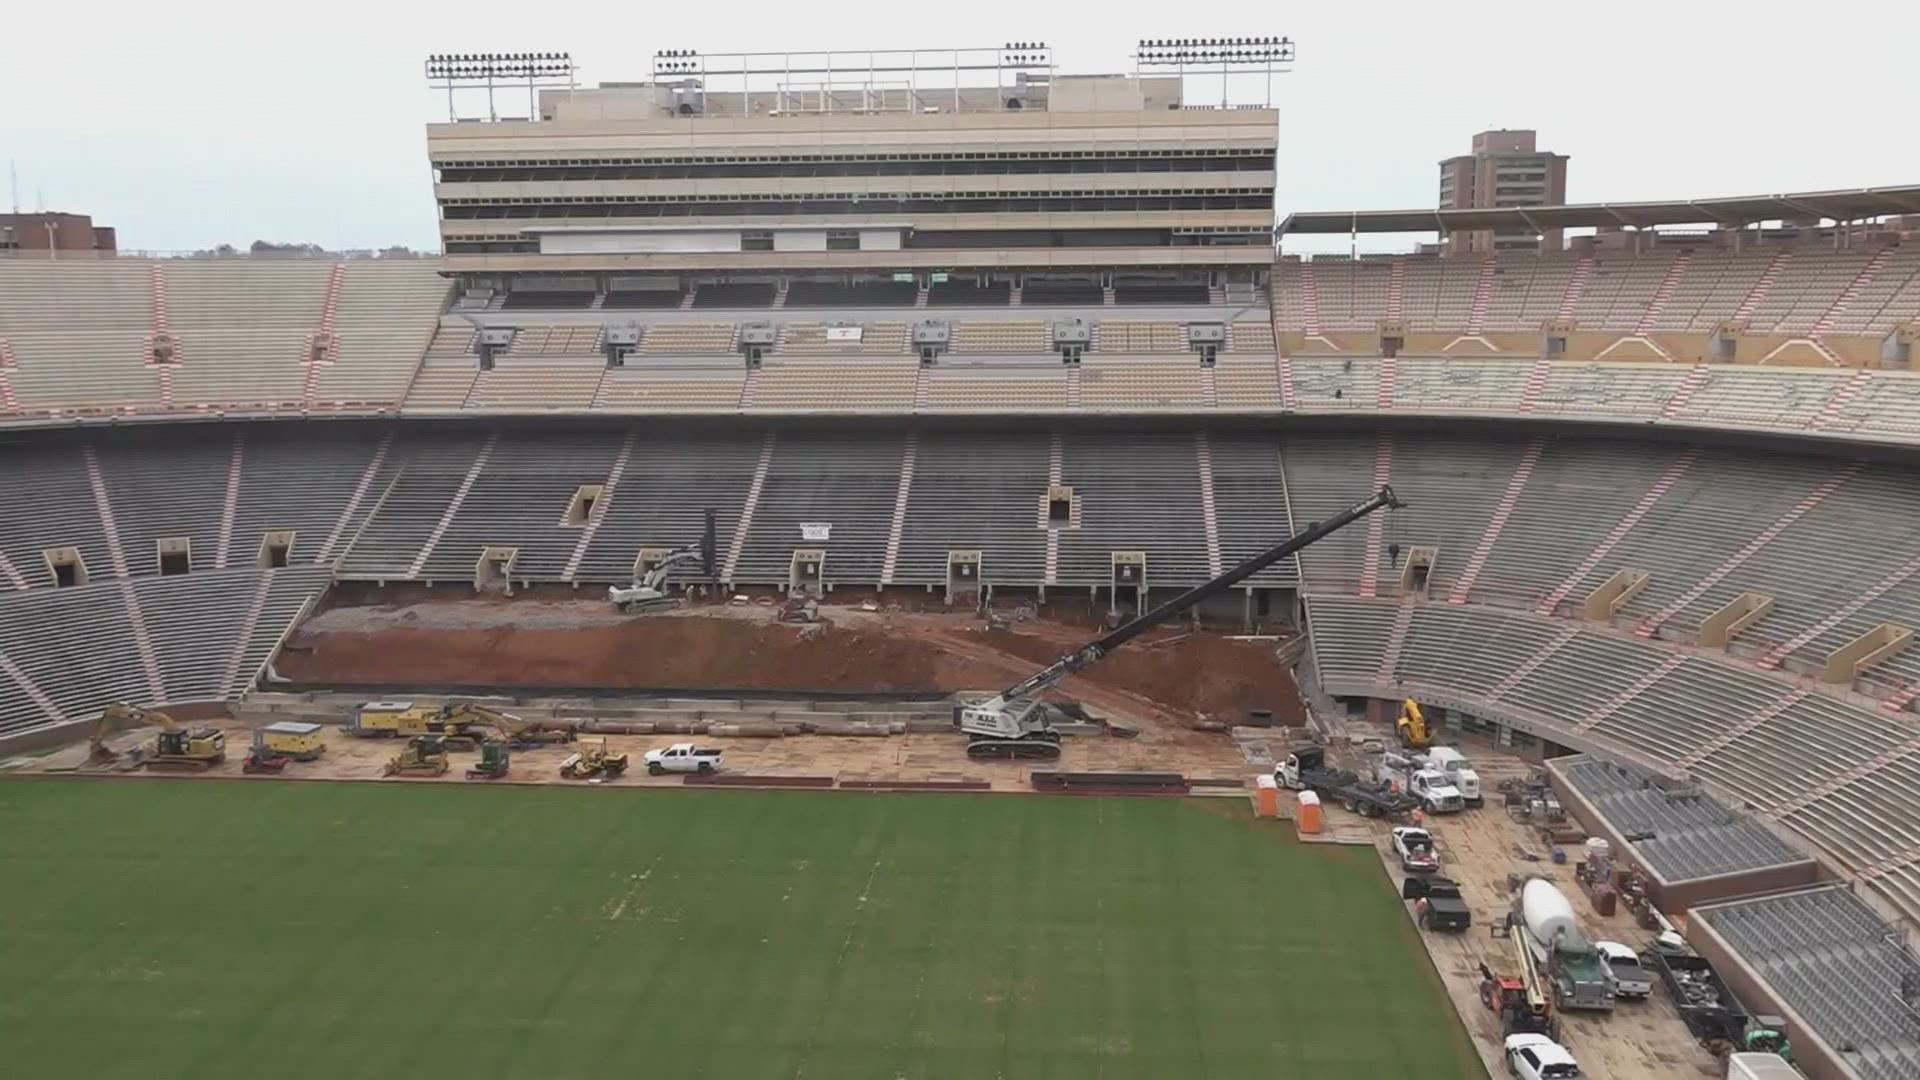 The game was cancelled due to ongoing construction at Neyland Stadium.